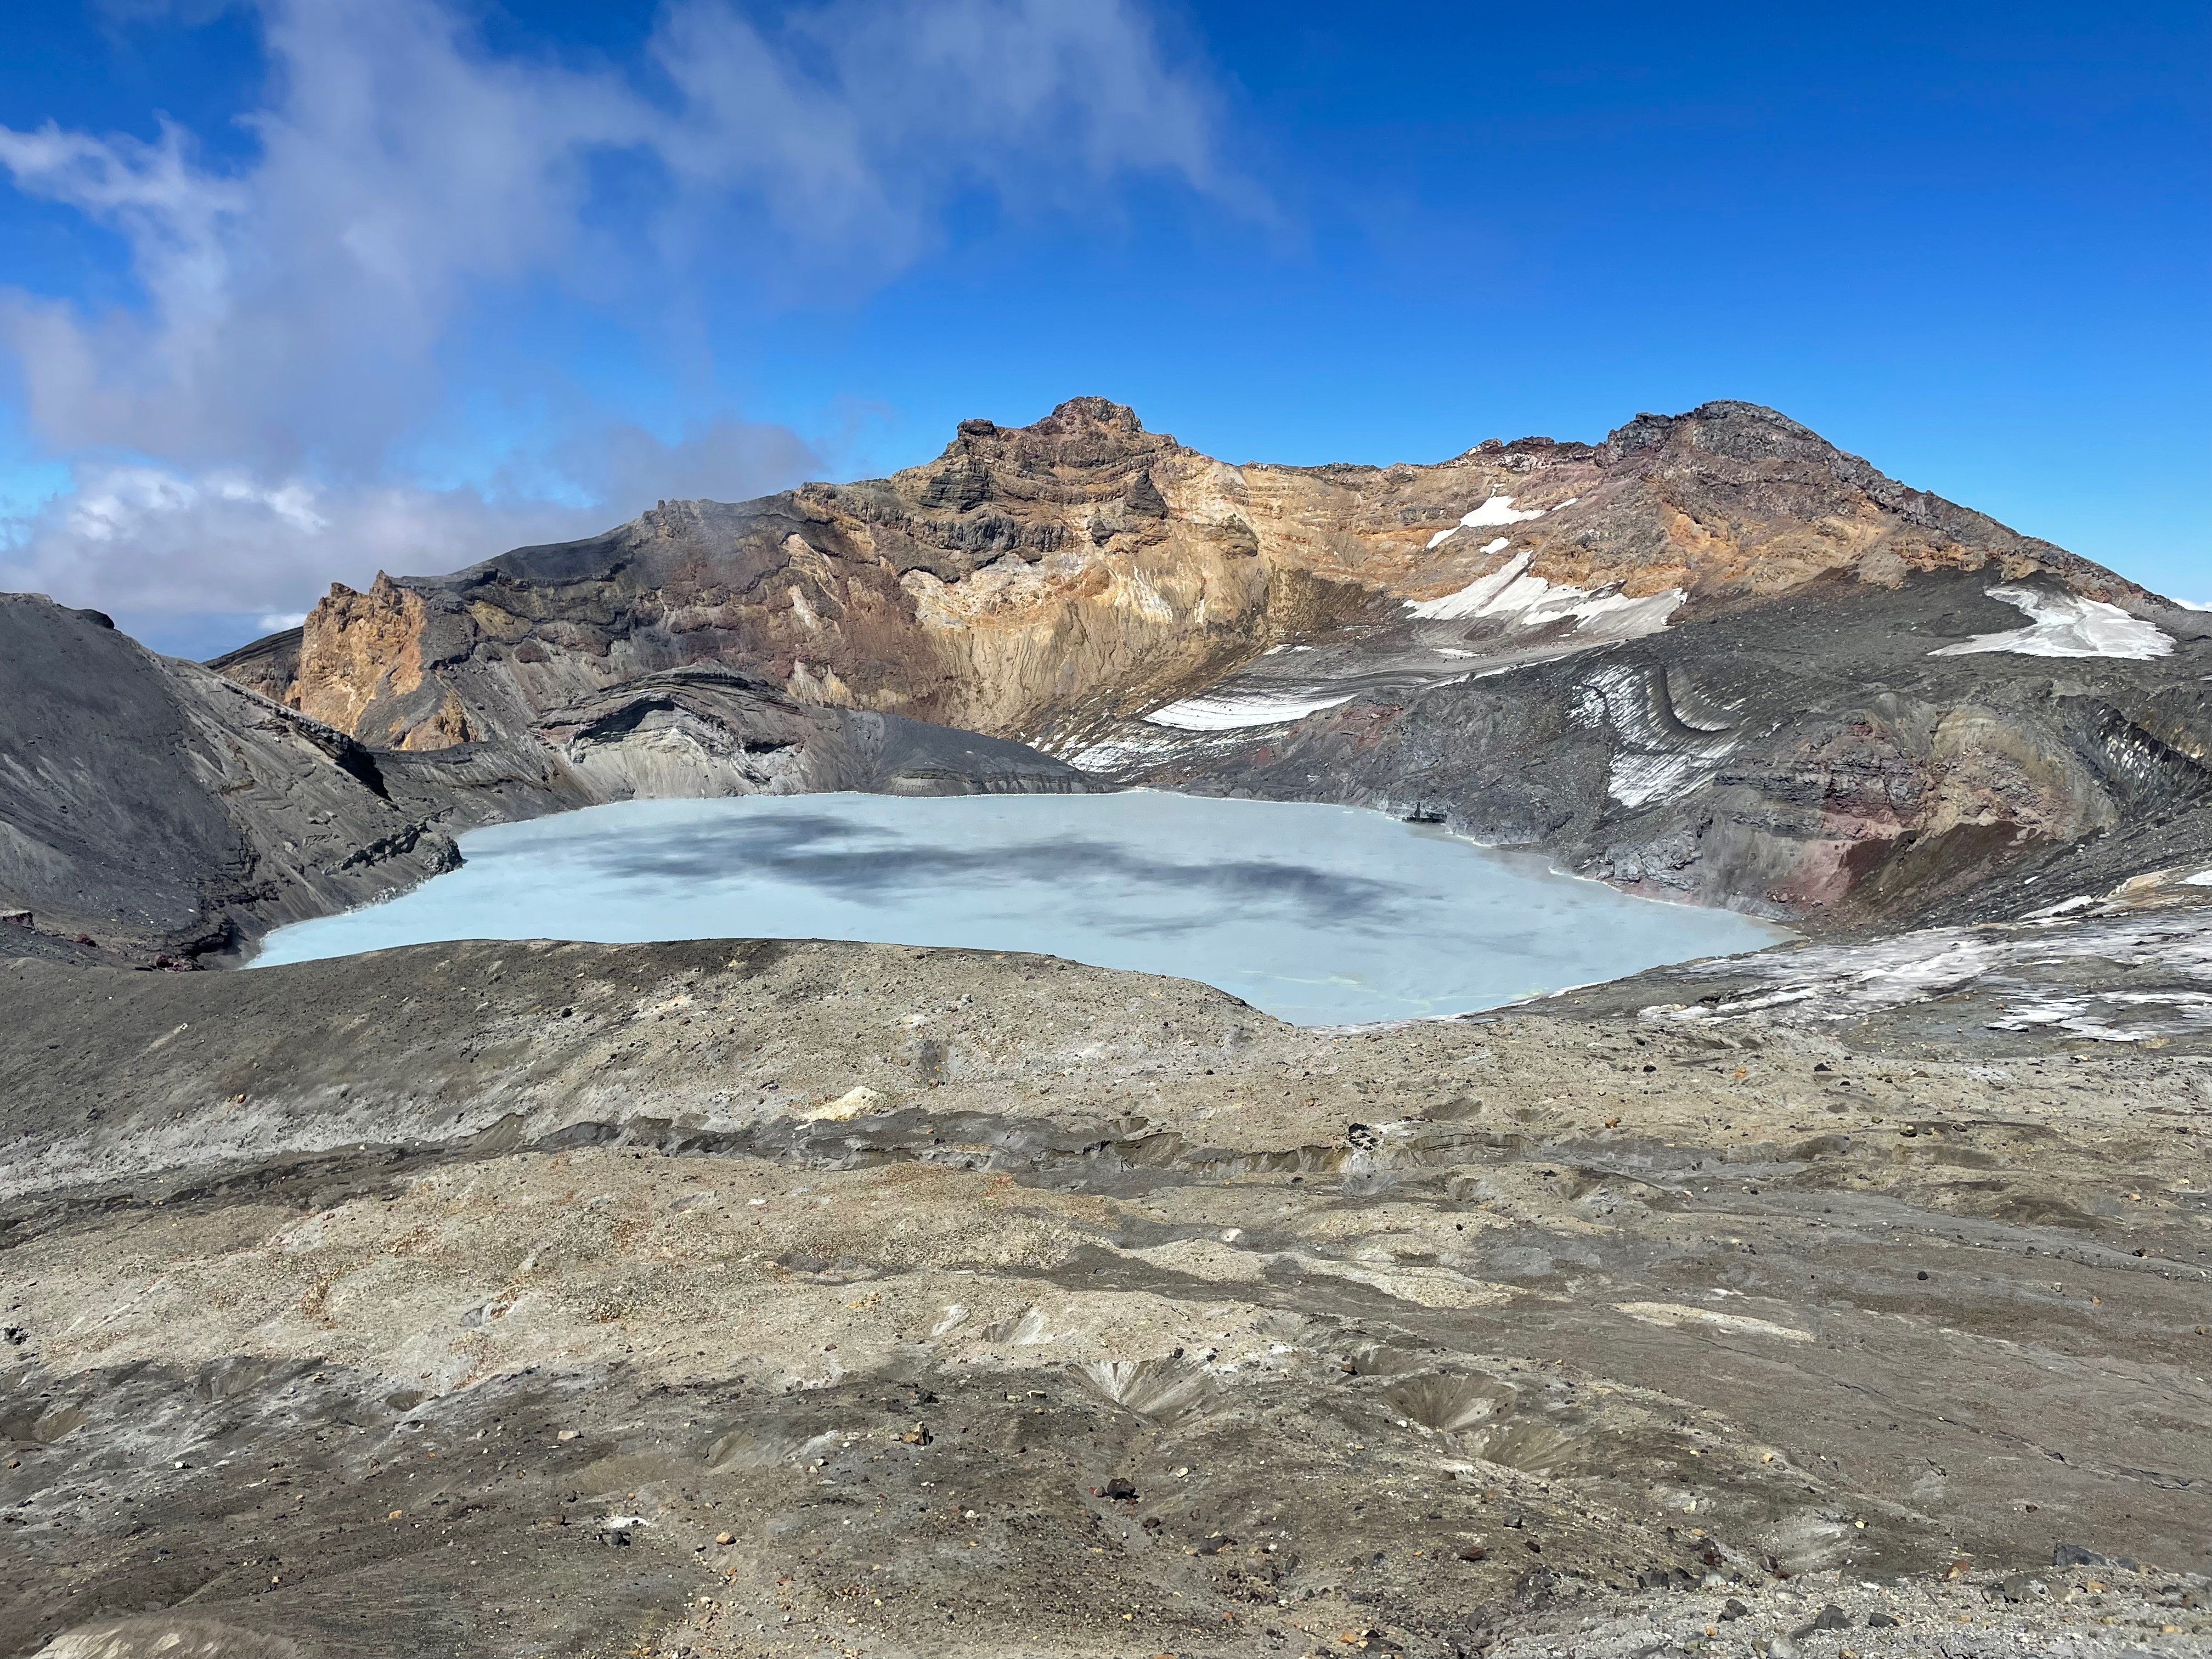 View of Ruapehu crater lake from the Dome summit.